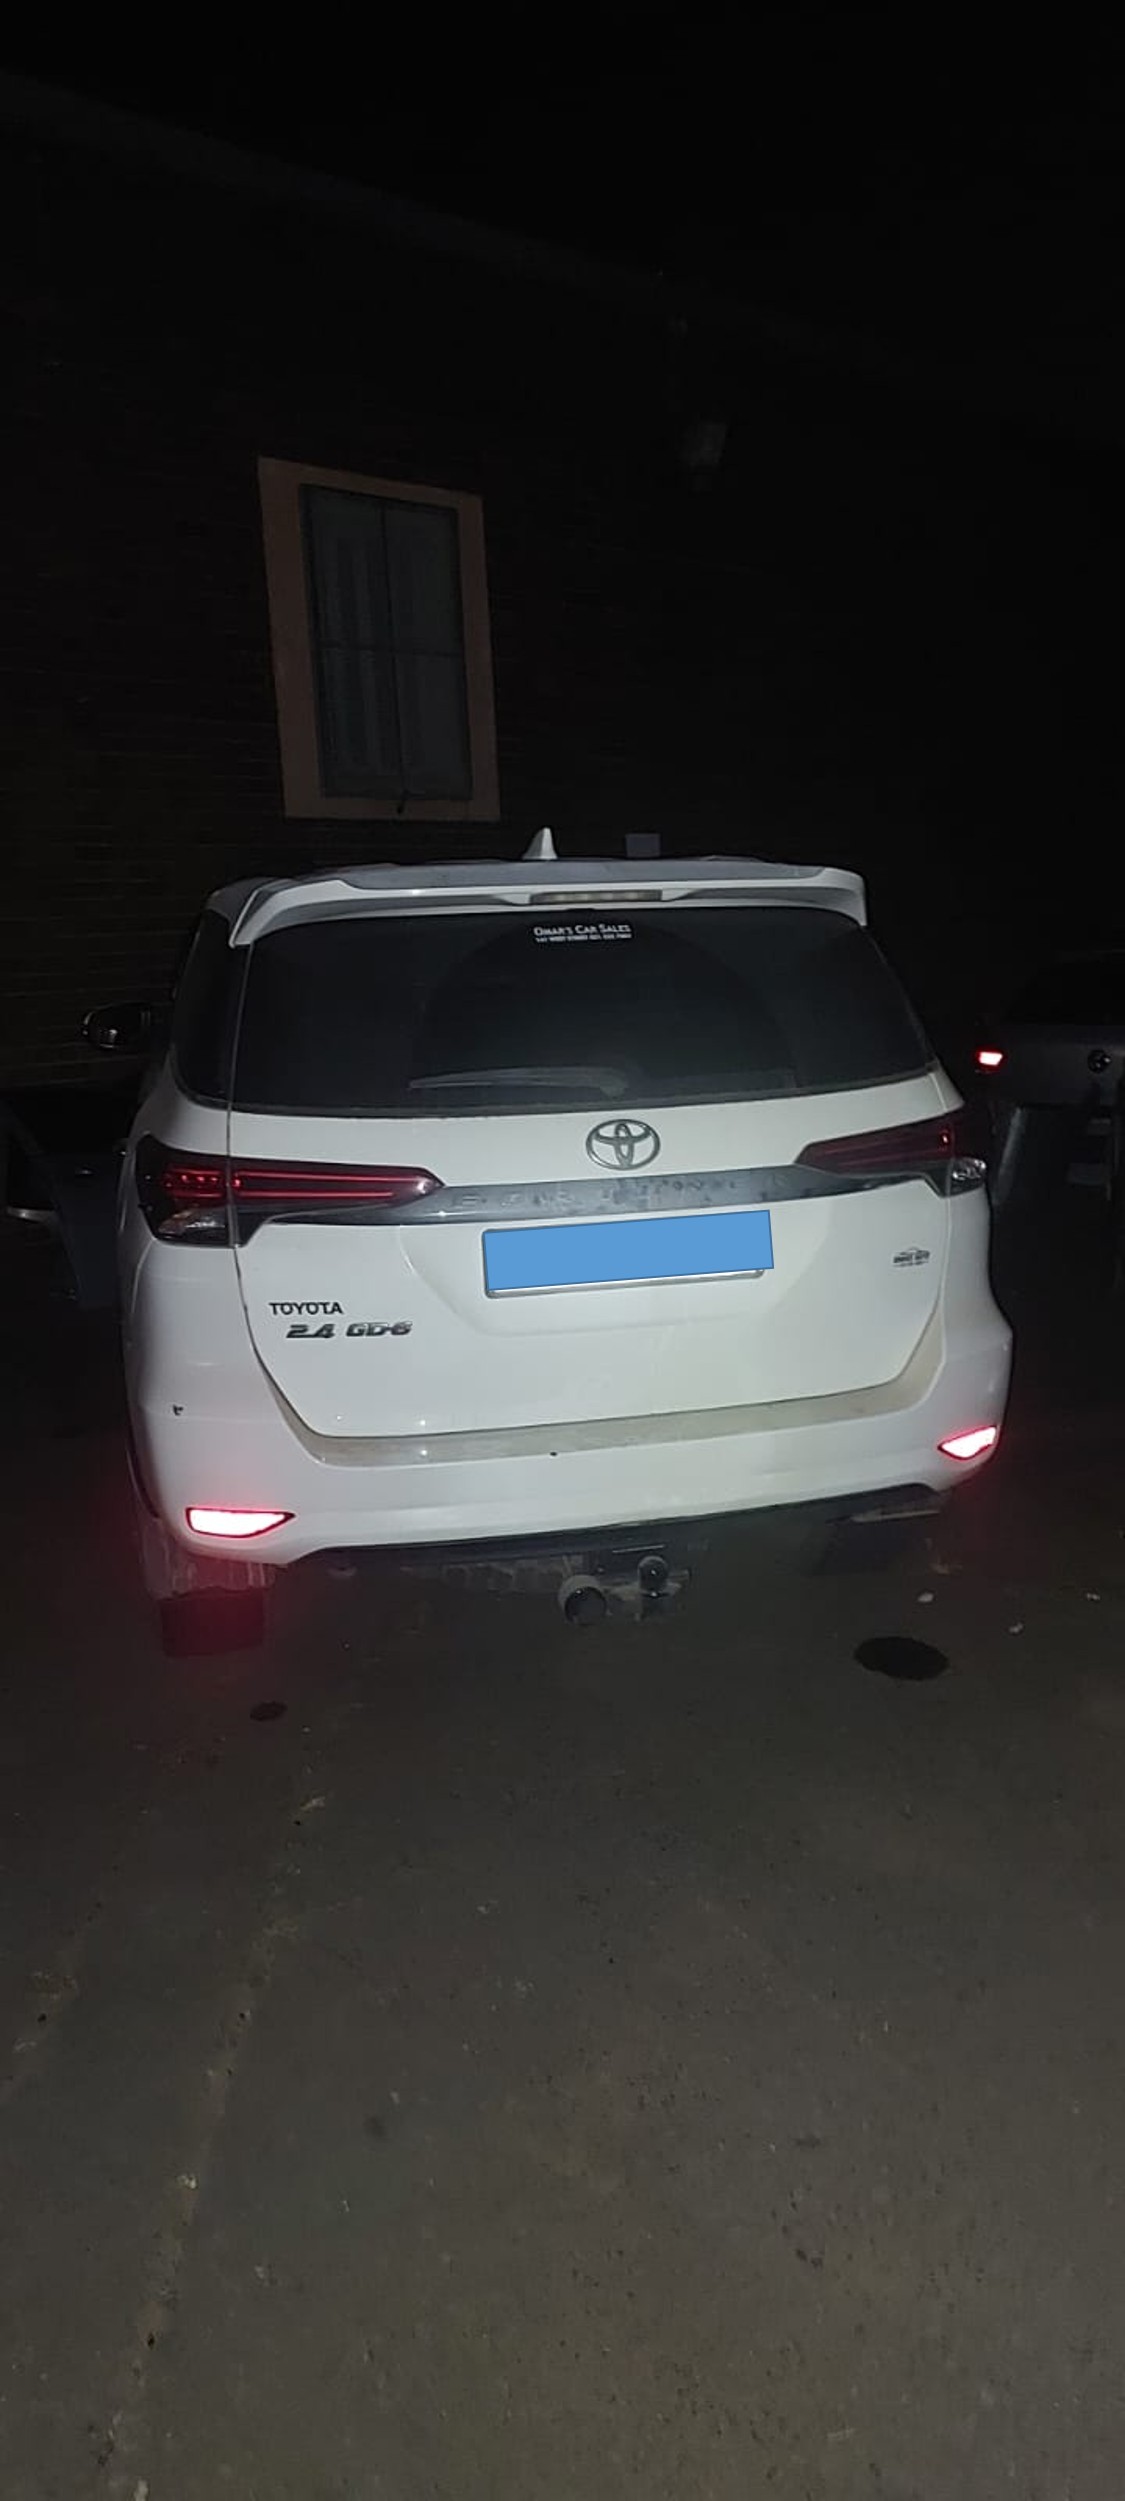 Stolen vehicle which was taken during a house robbery in Harding recovered